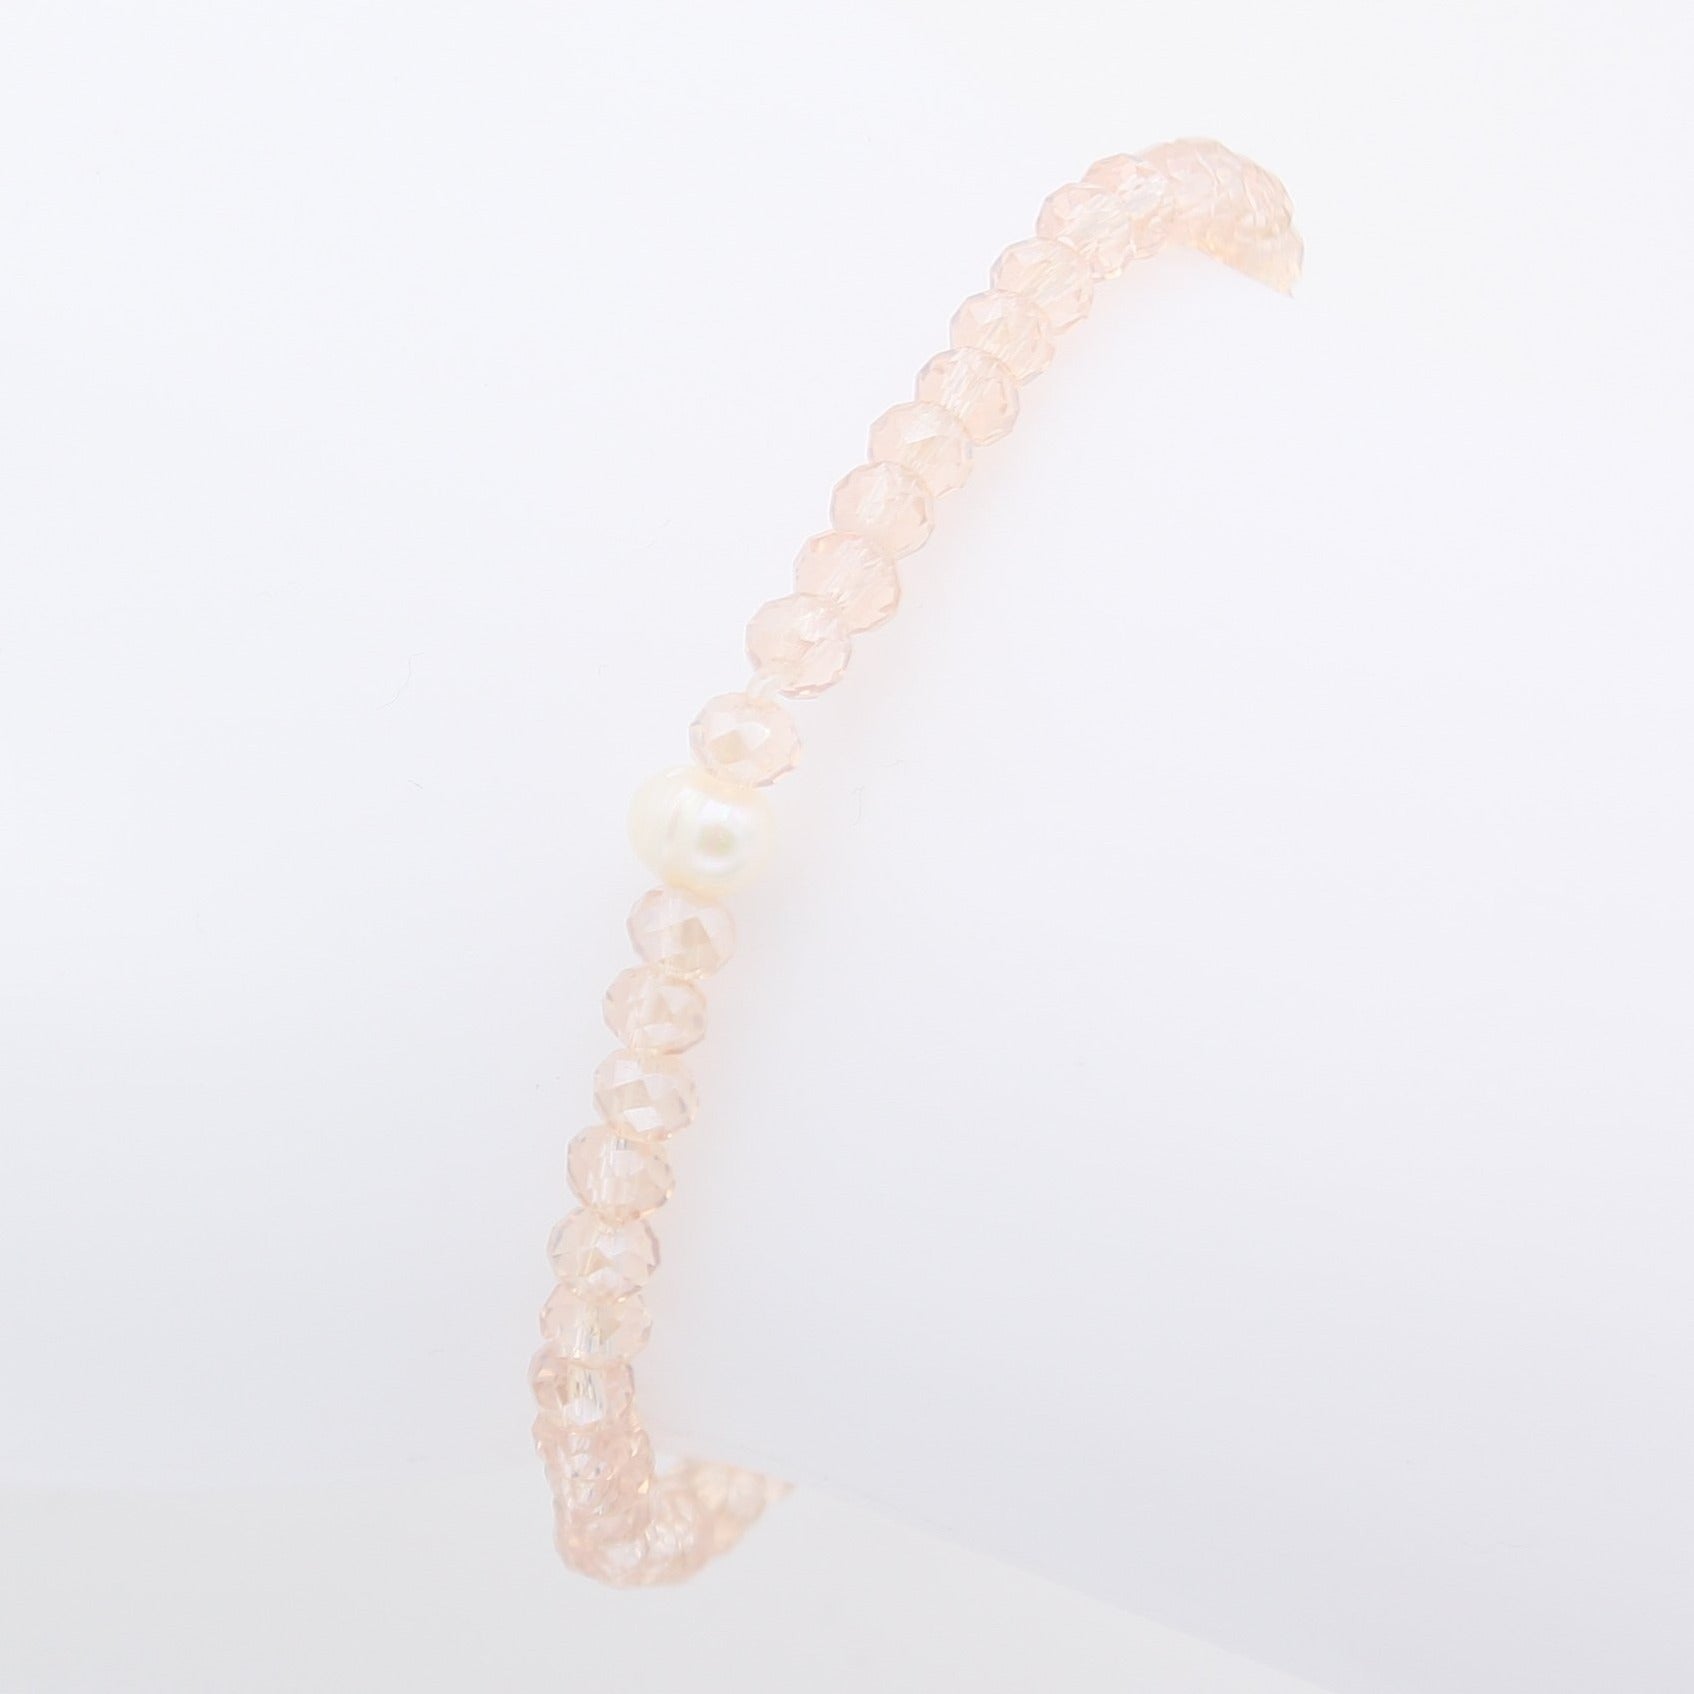 Armband "Just a Touch" 4mm  rosa klar mit Perle